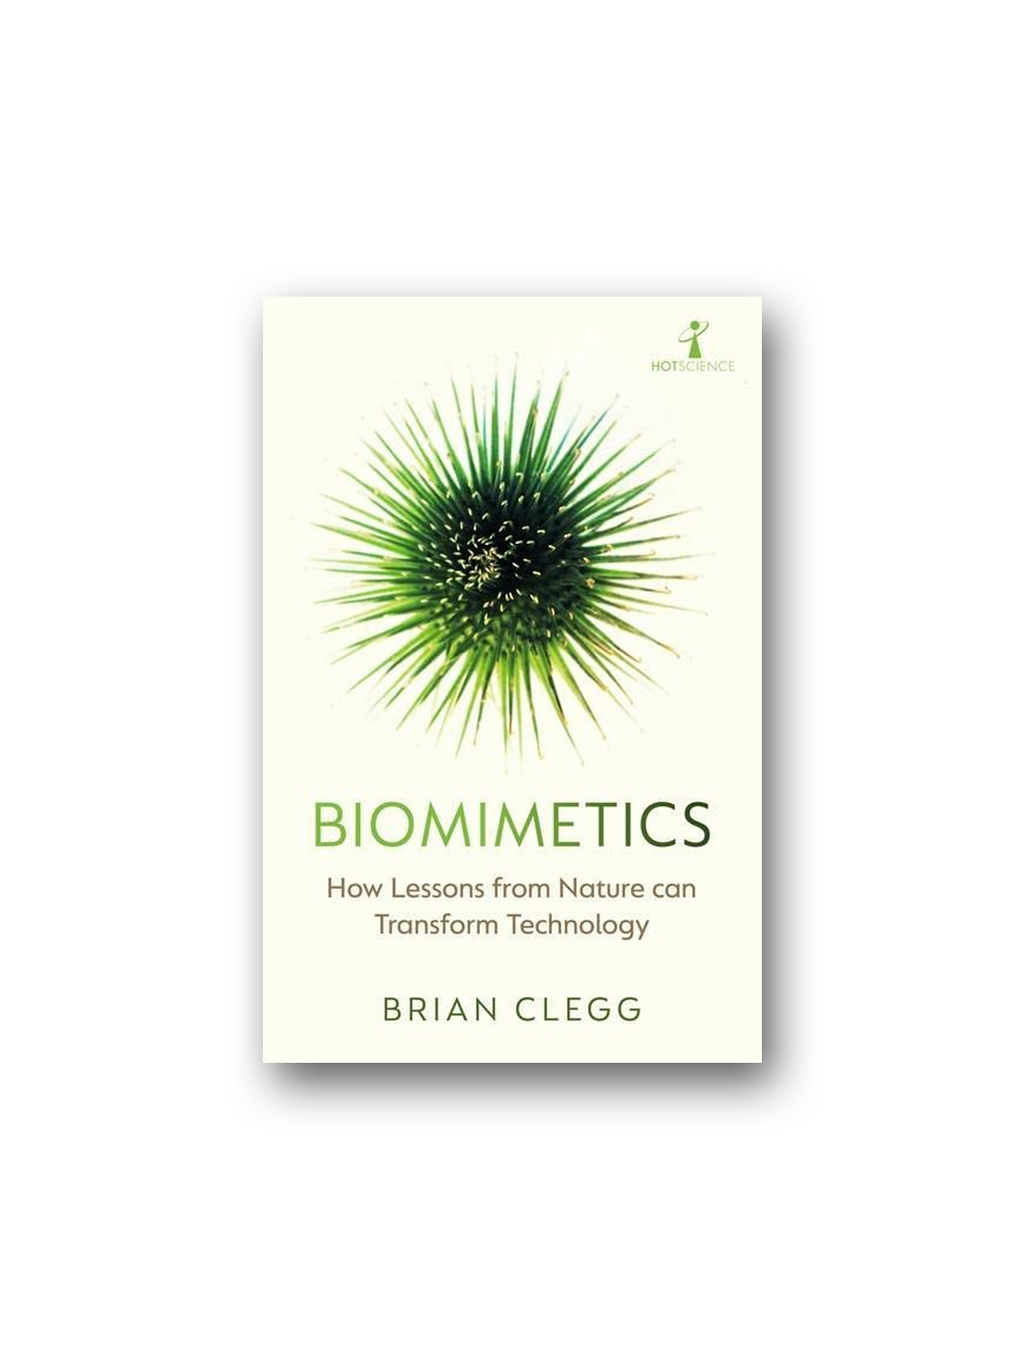 Biomimetics: How Lessons from Nature can Transform Technology